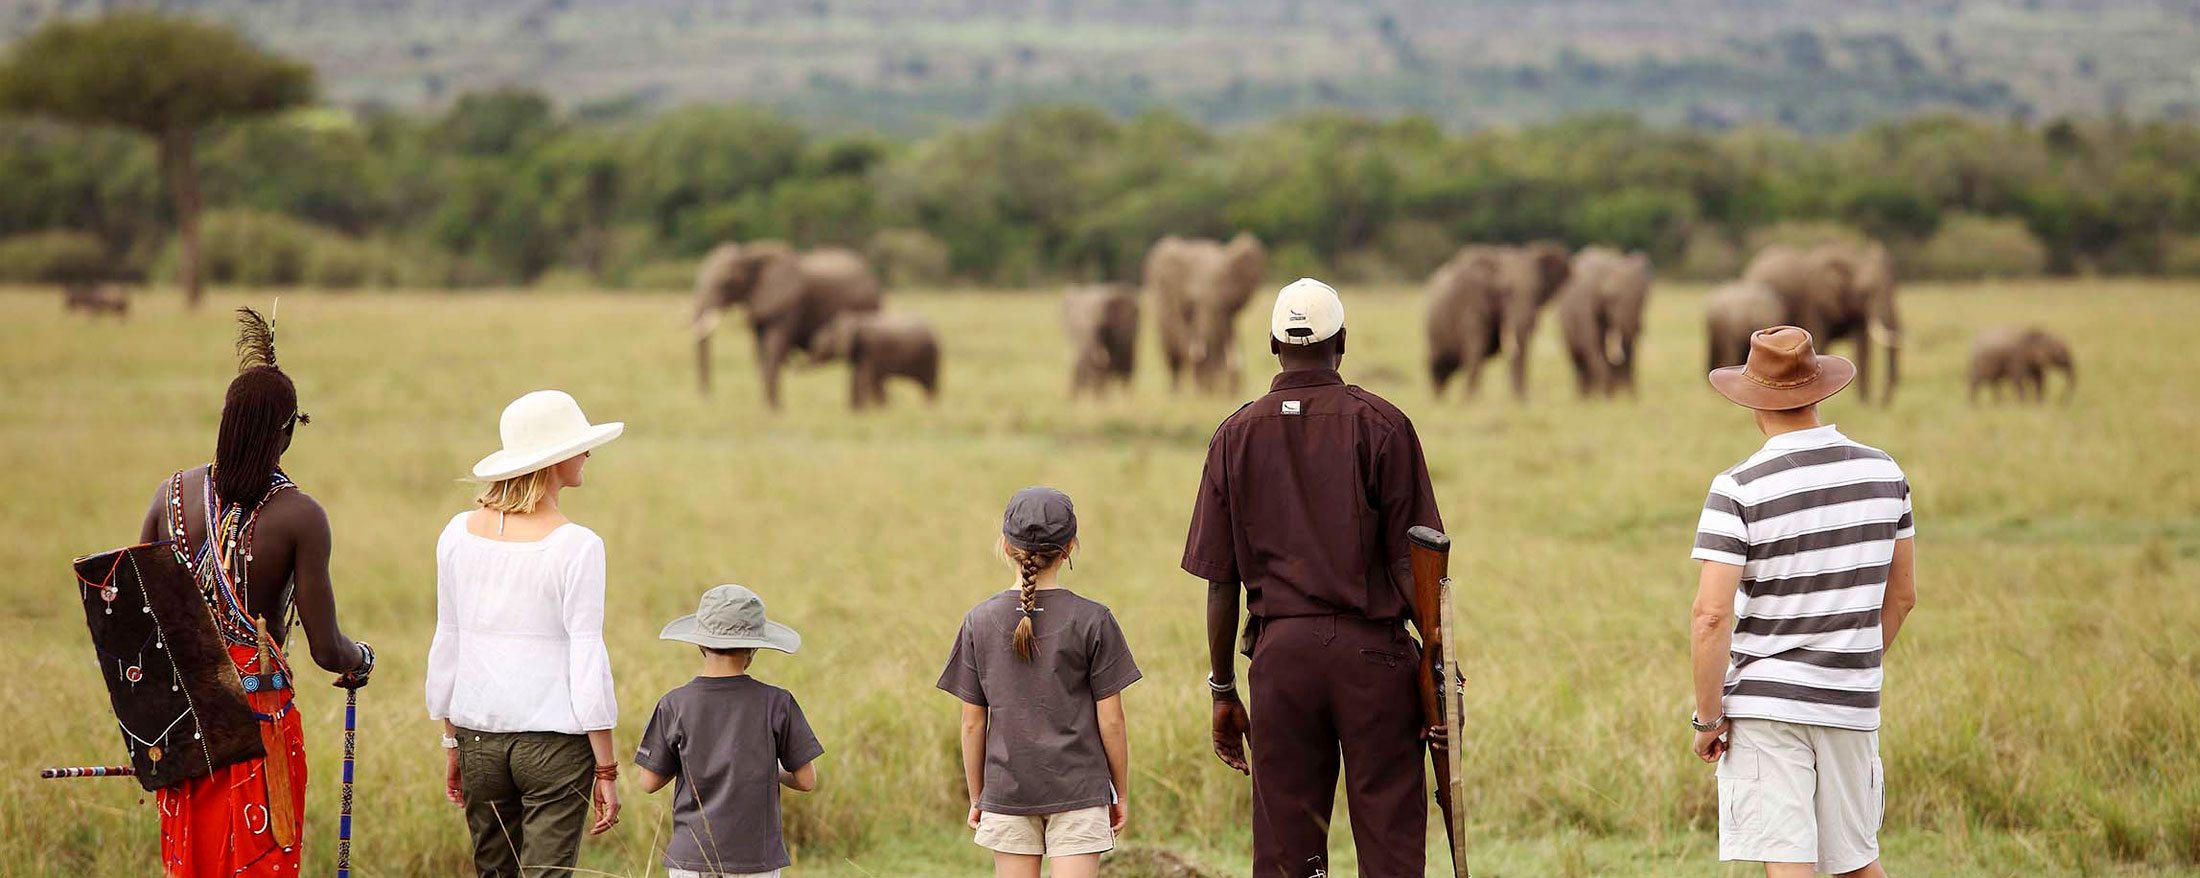 Plan a Safari with Children: African safaris are frequently life-changing events for kids, leaving them with happy memories that they cherish